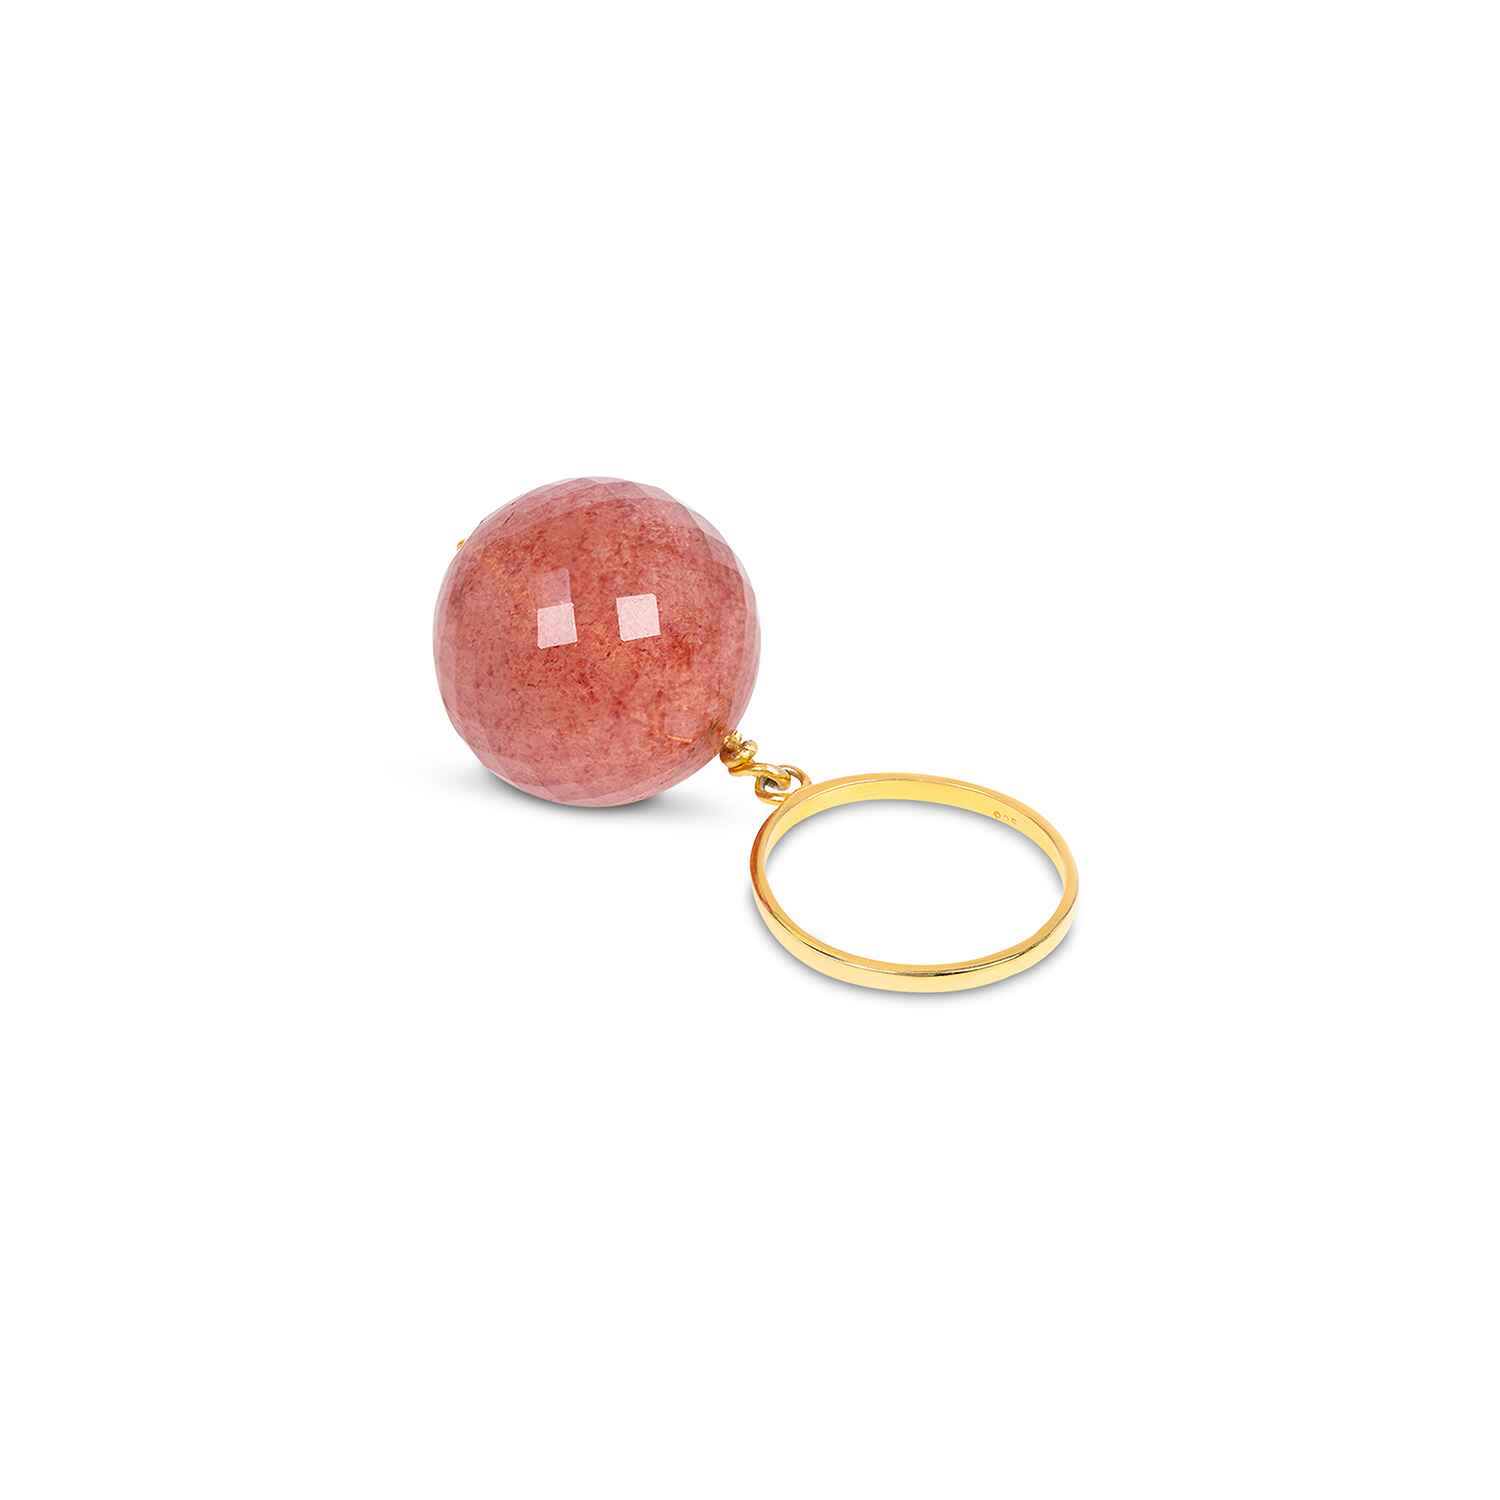 The Bubble Strawberry Quartz Ring features a stunning berry-colored crystal which shines deep with a vibrant red core. The recycled gemstone is attached to a size adjustable ring that allows the stone to move freely around your finger making this a unique ring.